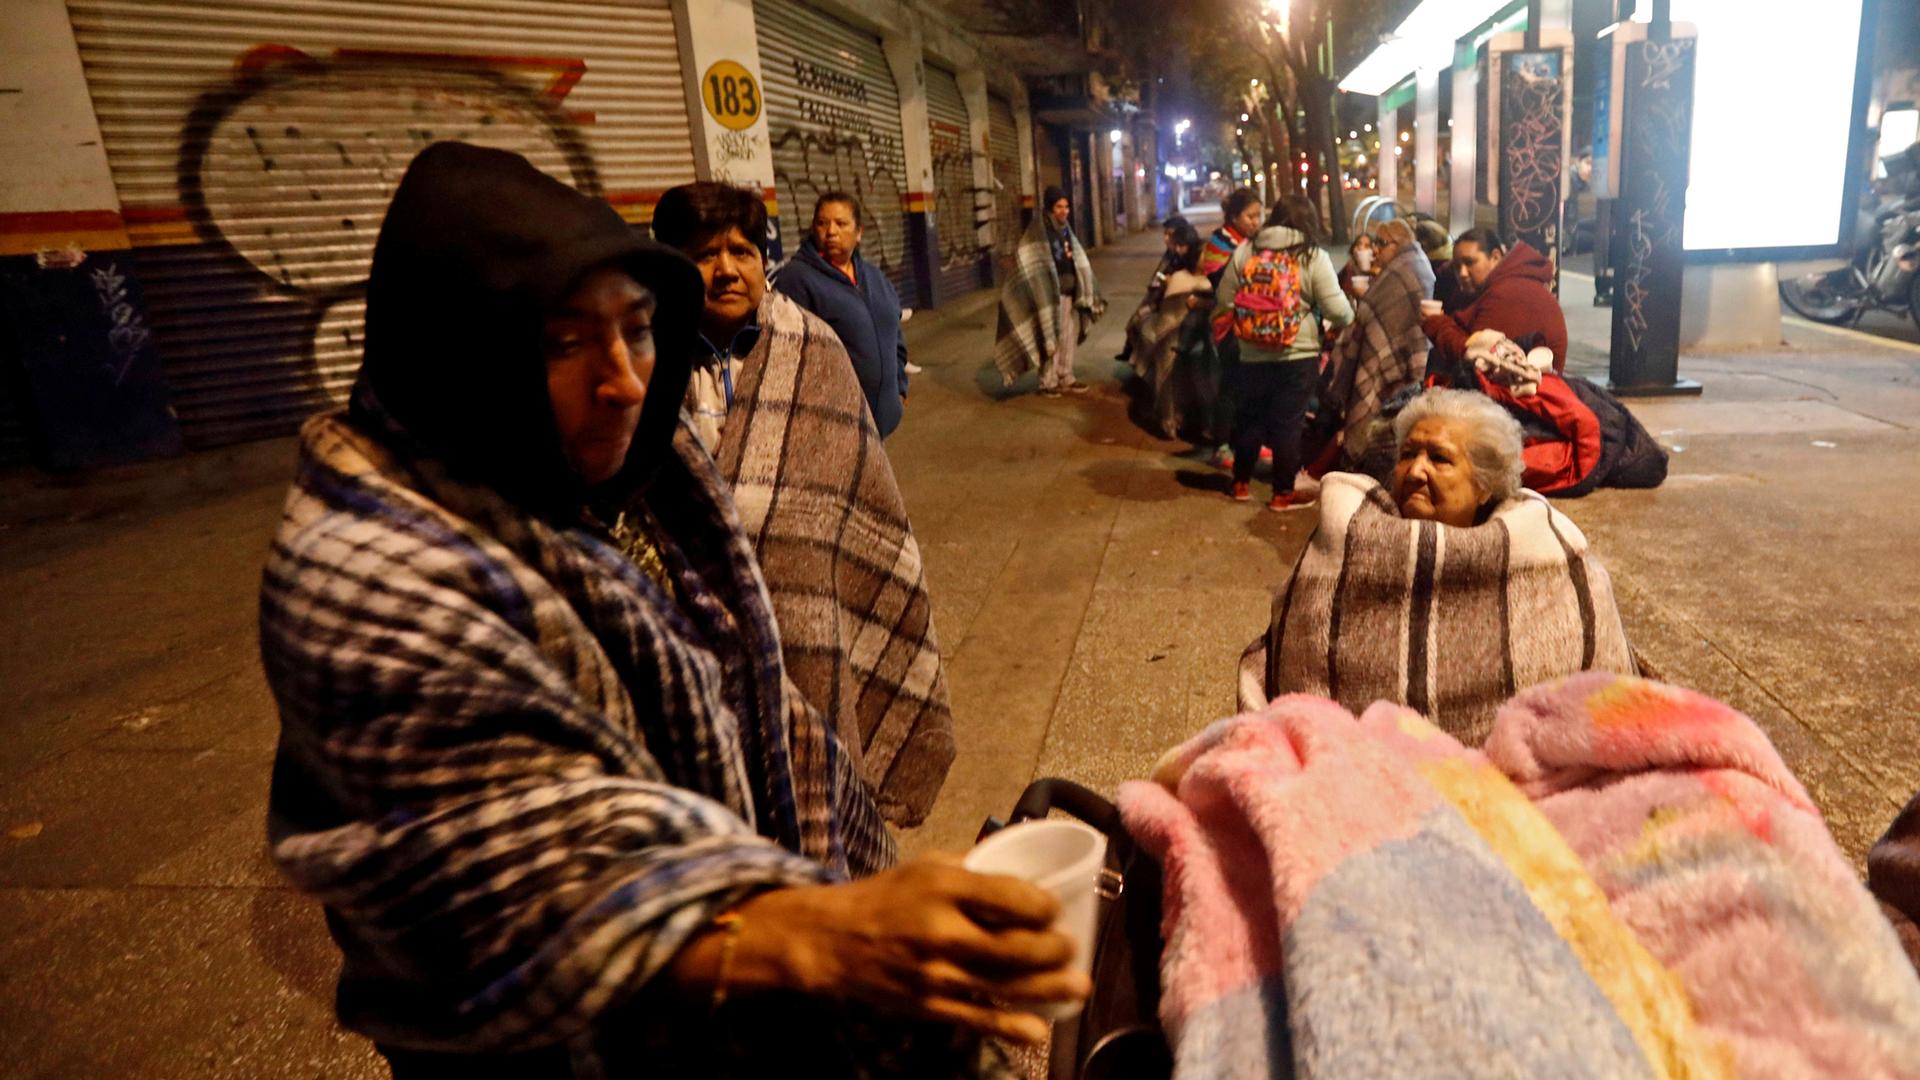 People gather on a street after an earthquake hit Mexico City.